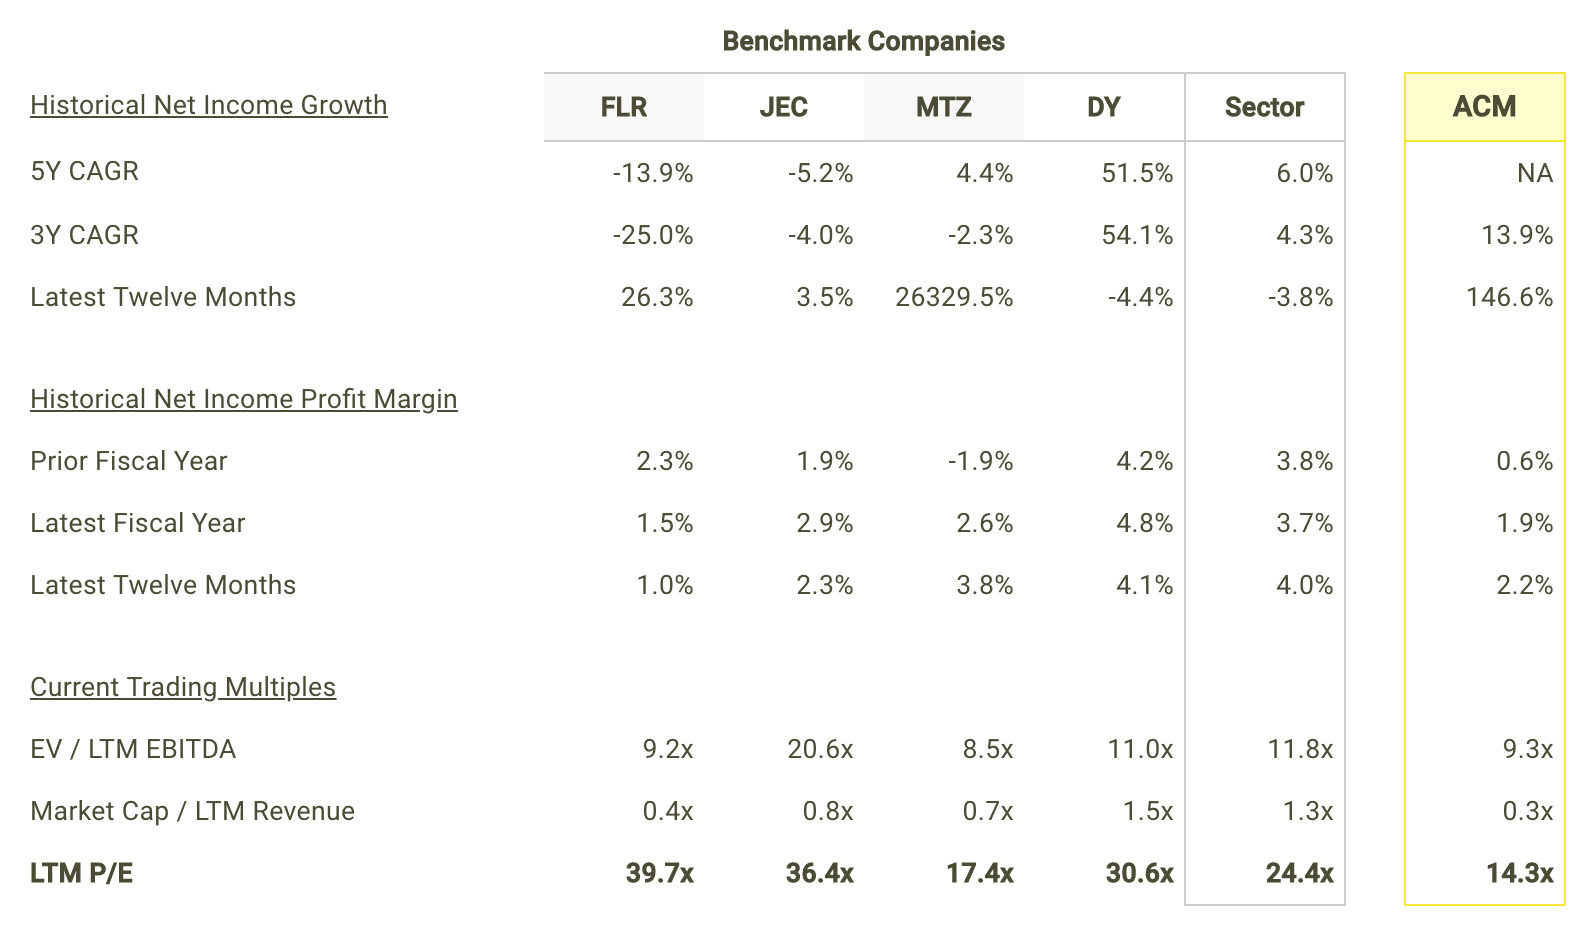 ACM Net Income Growth and Margins vs Peers Table